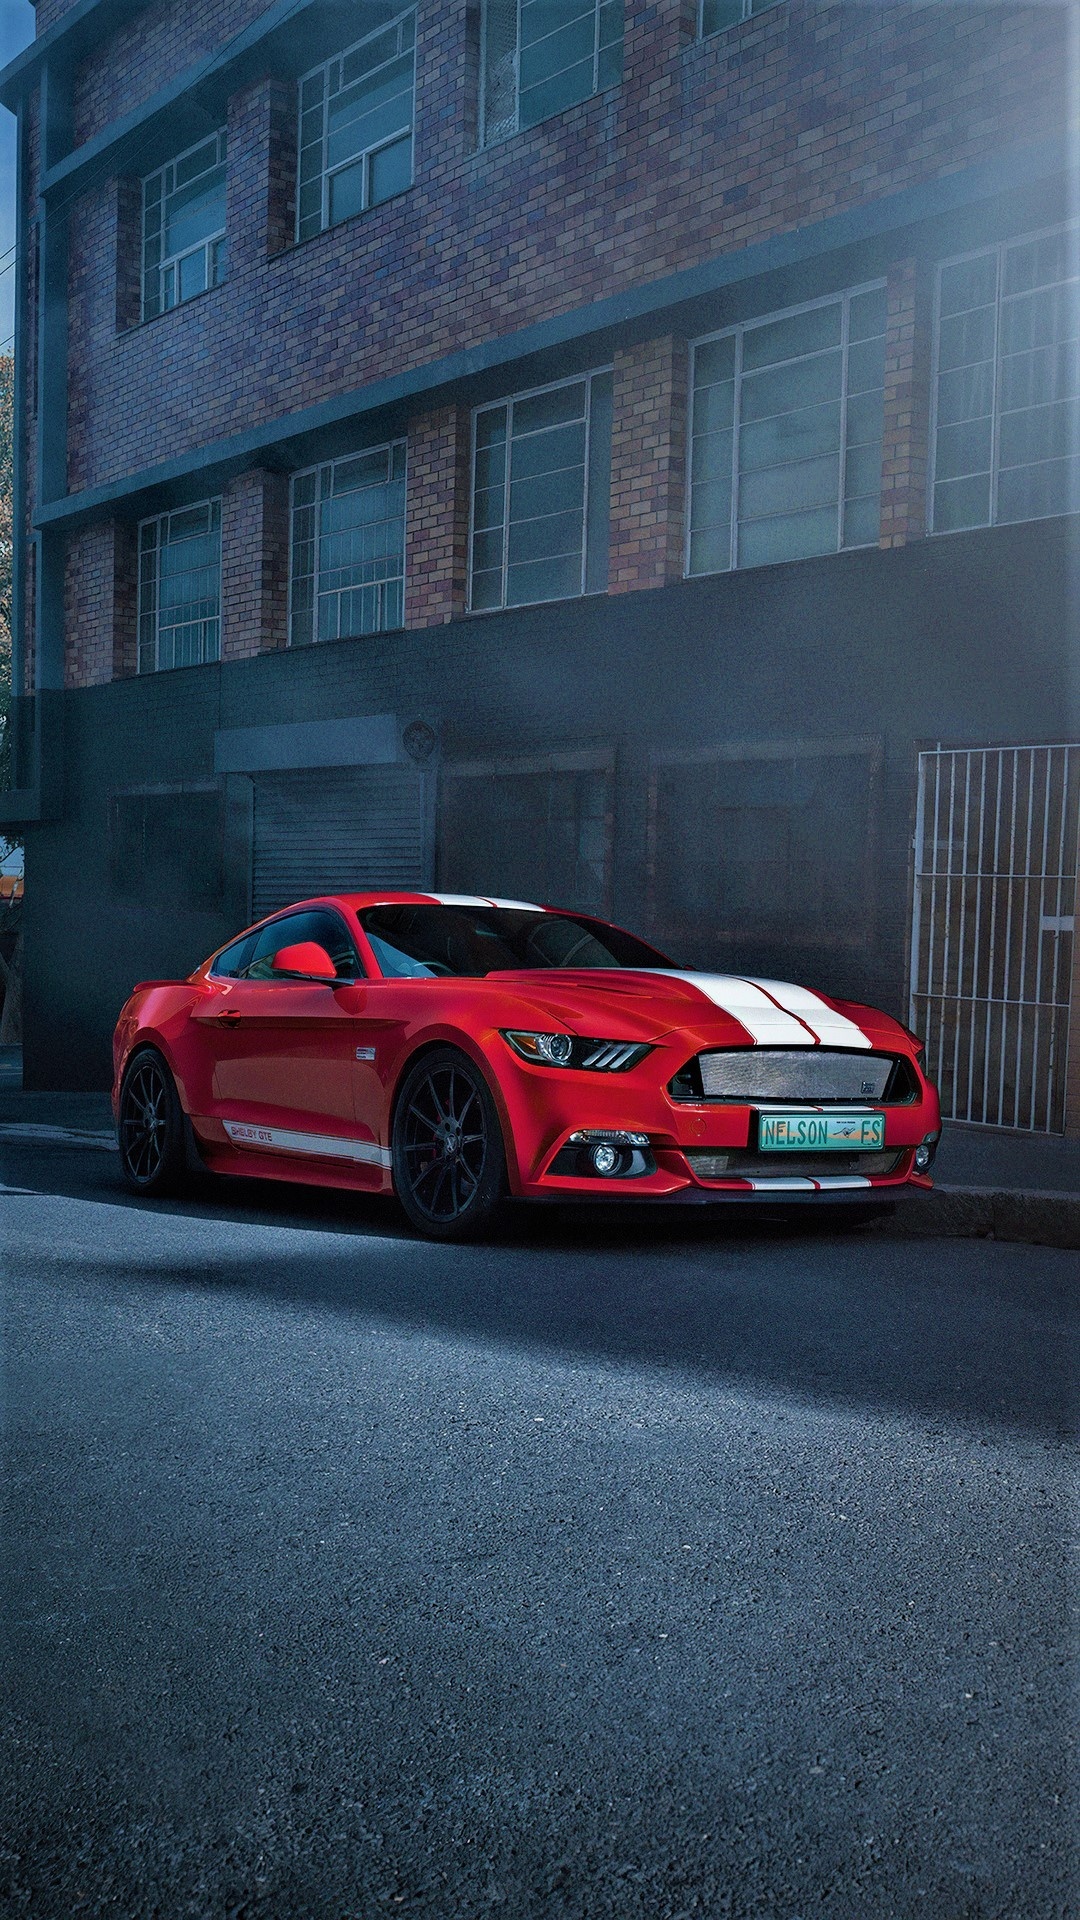 Classic Mustang, Legendary design, Iconic styling, Timeless American muscle, Revved engine, 1080x1920 Full HD Phone